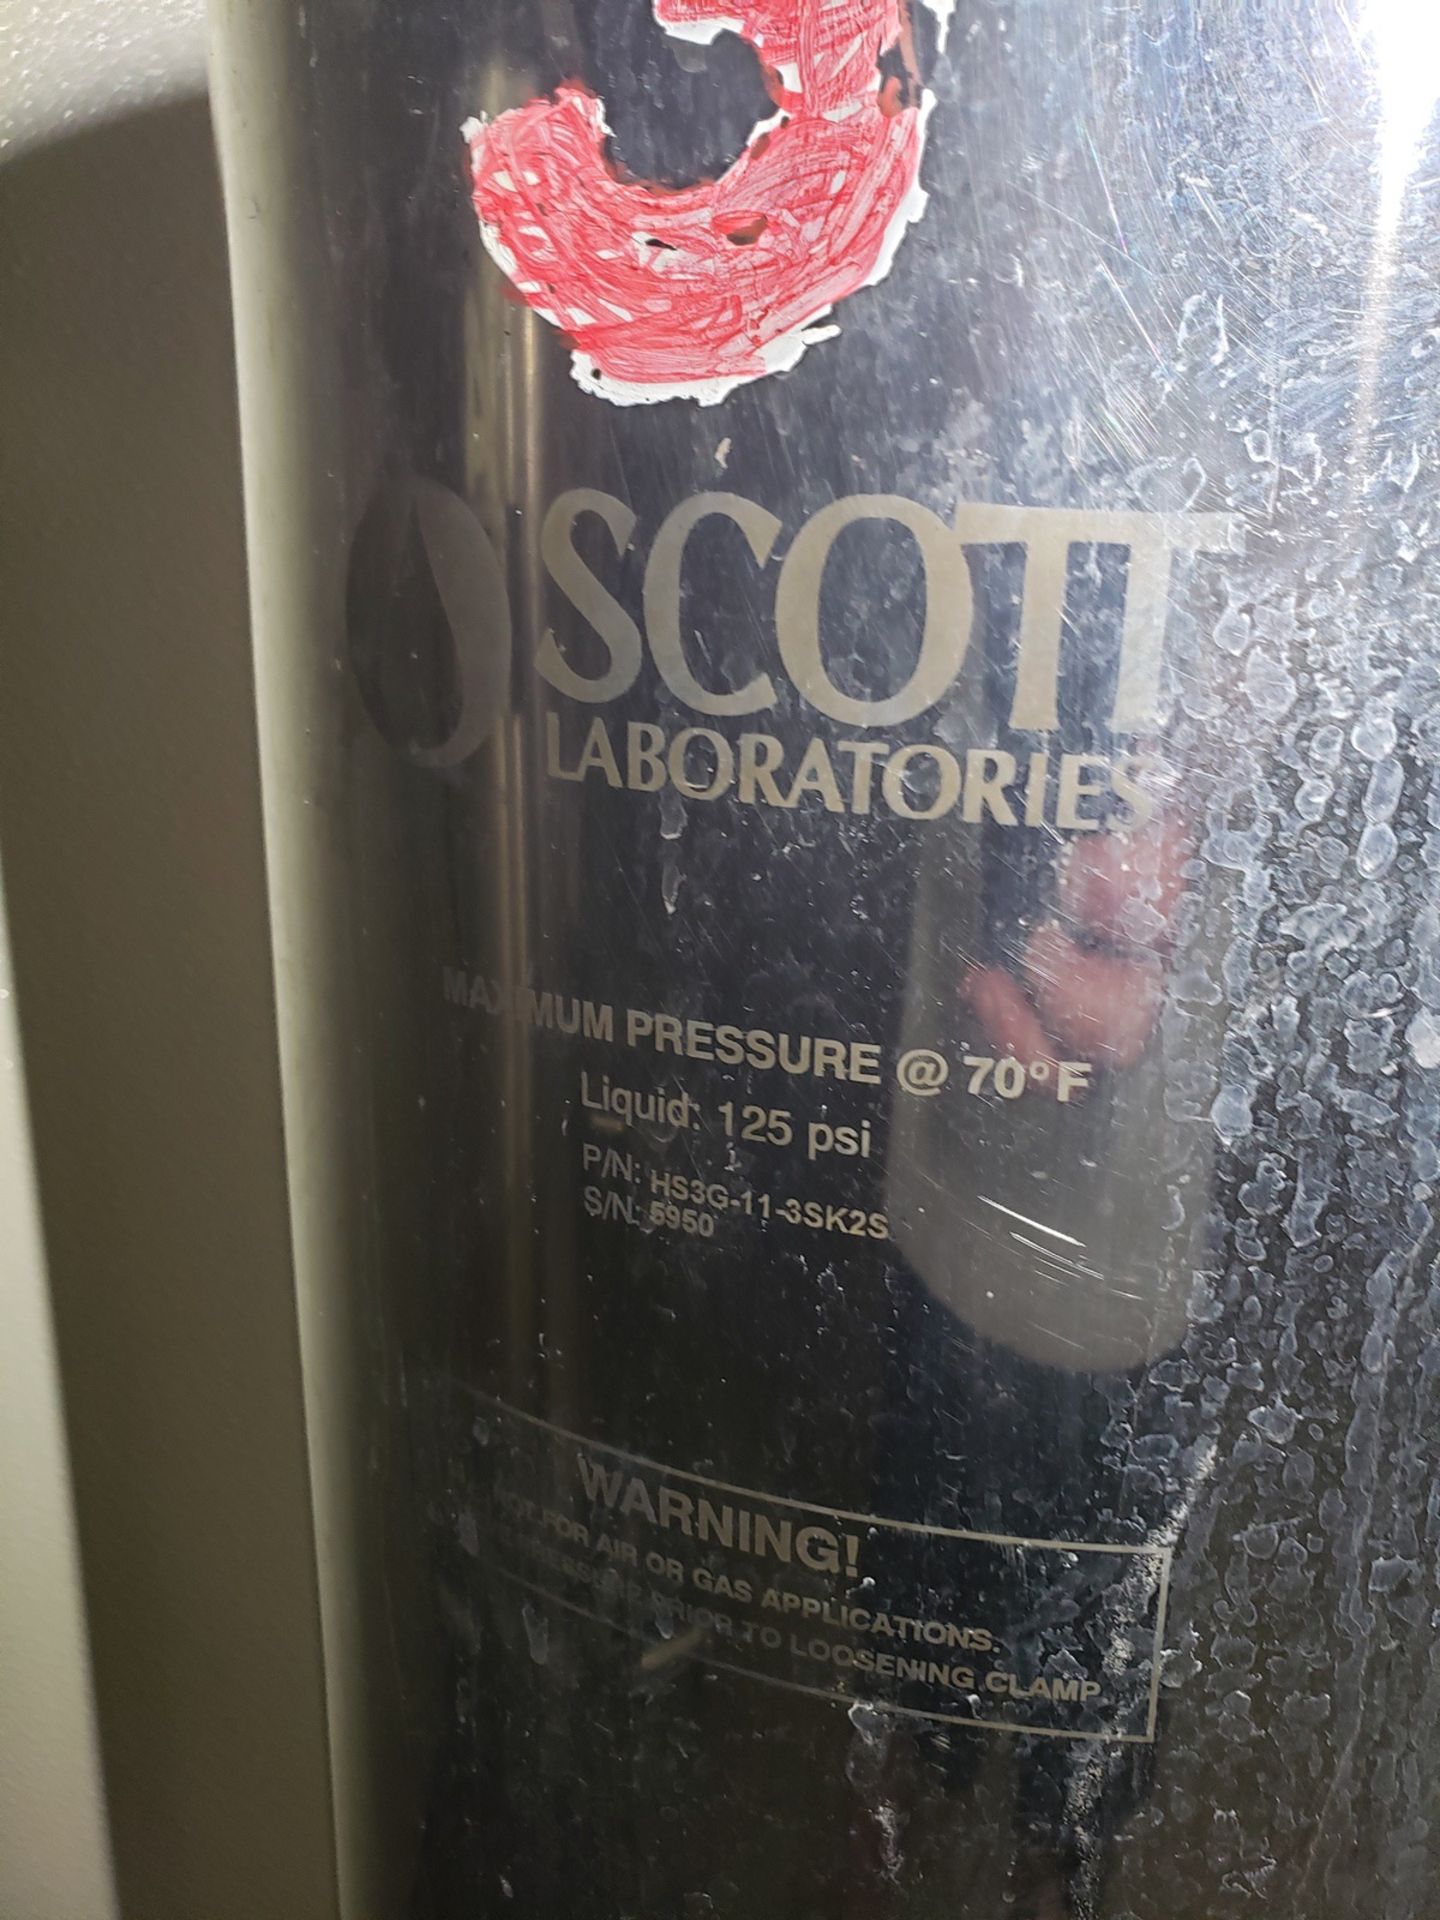 Scott Stainless Steel Canister Filter | Rig Fee $50 - Image 2 of 2